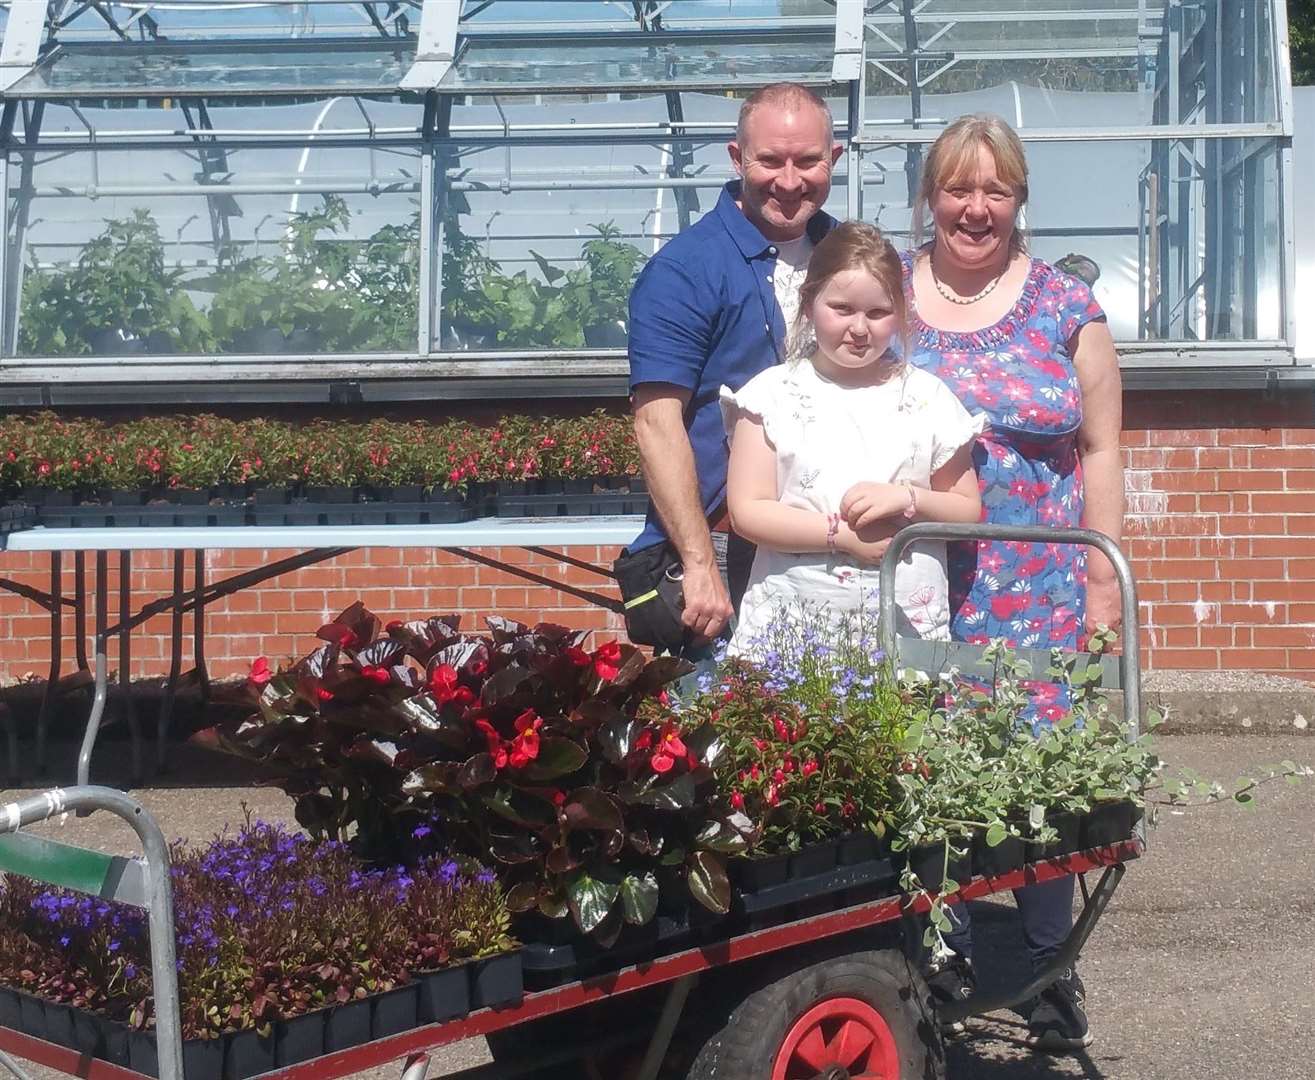 Croy pupil and Botany Club member Isla (9) with parents Ian & Kate MacLennan collecting plants from the Botanic Gardens to share with fellow Croy pupils.